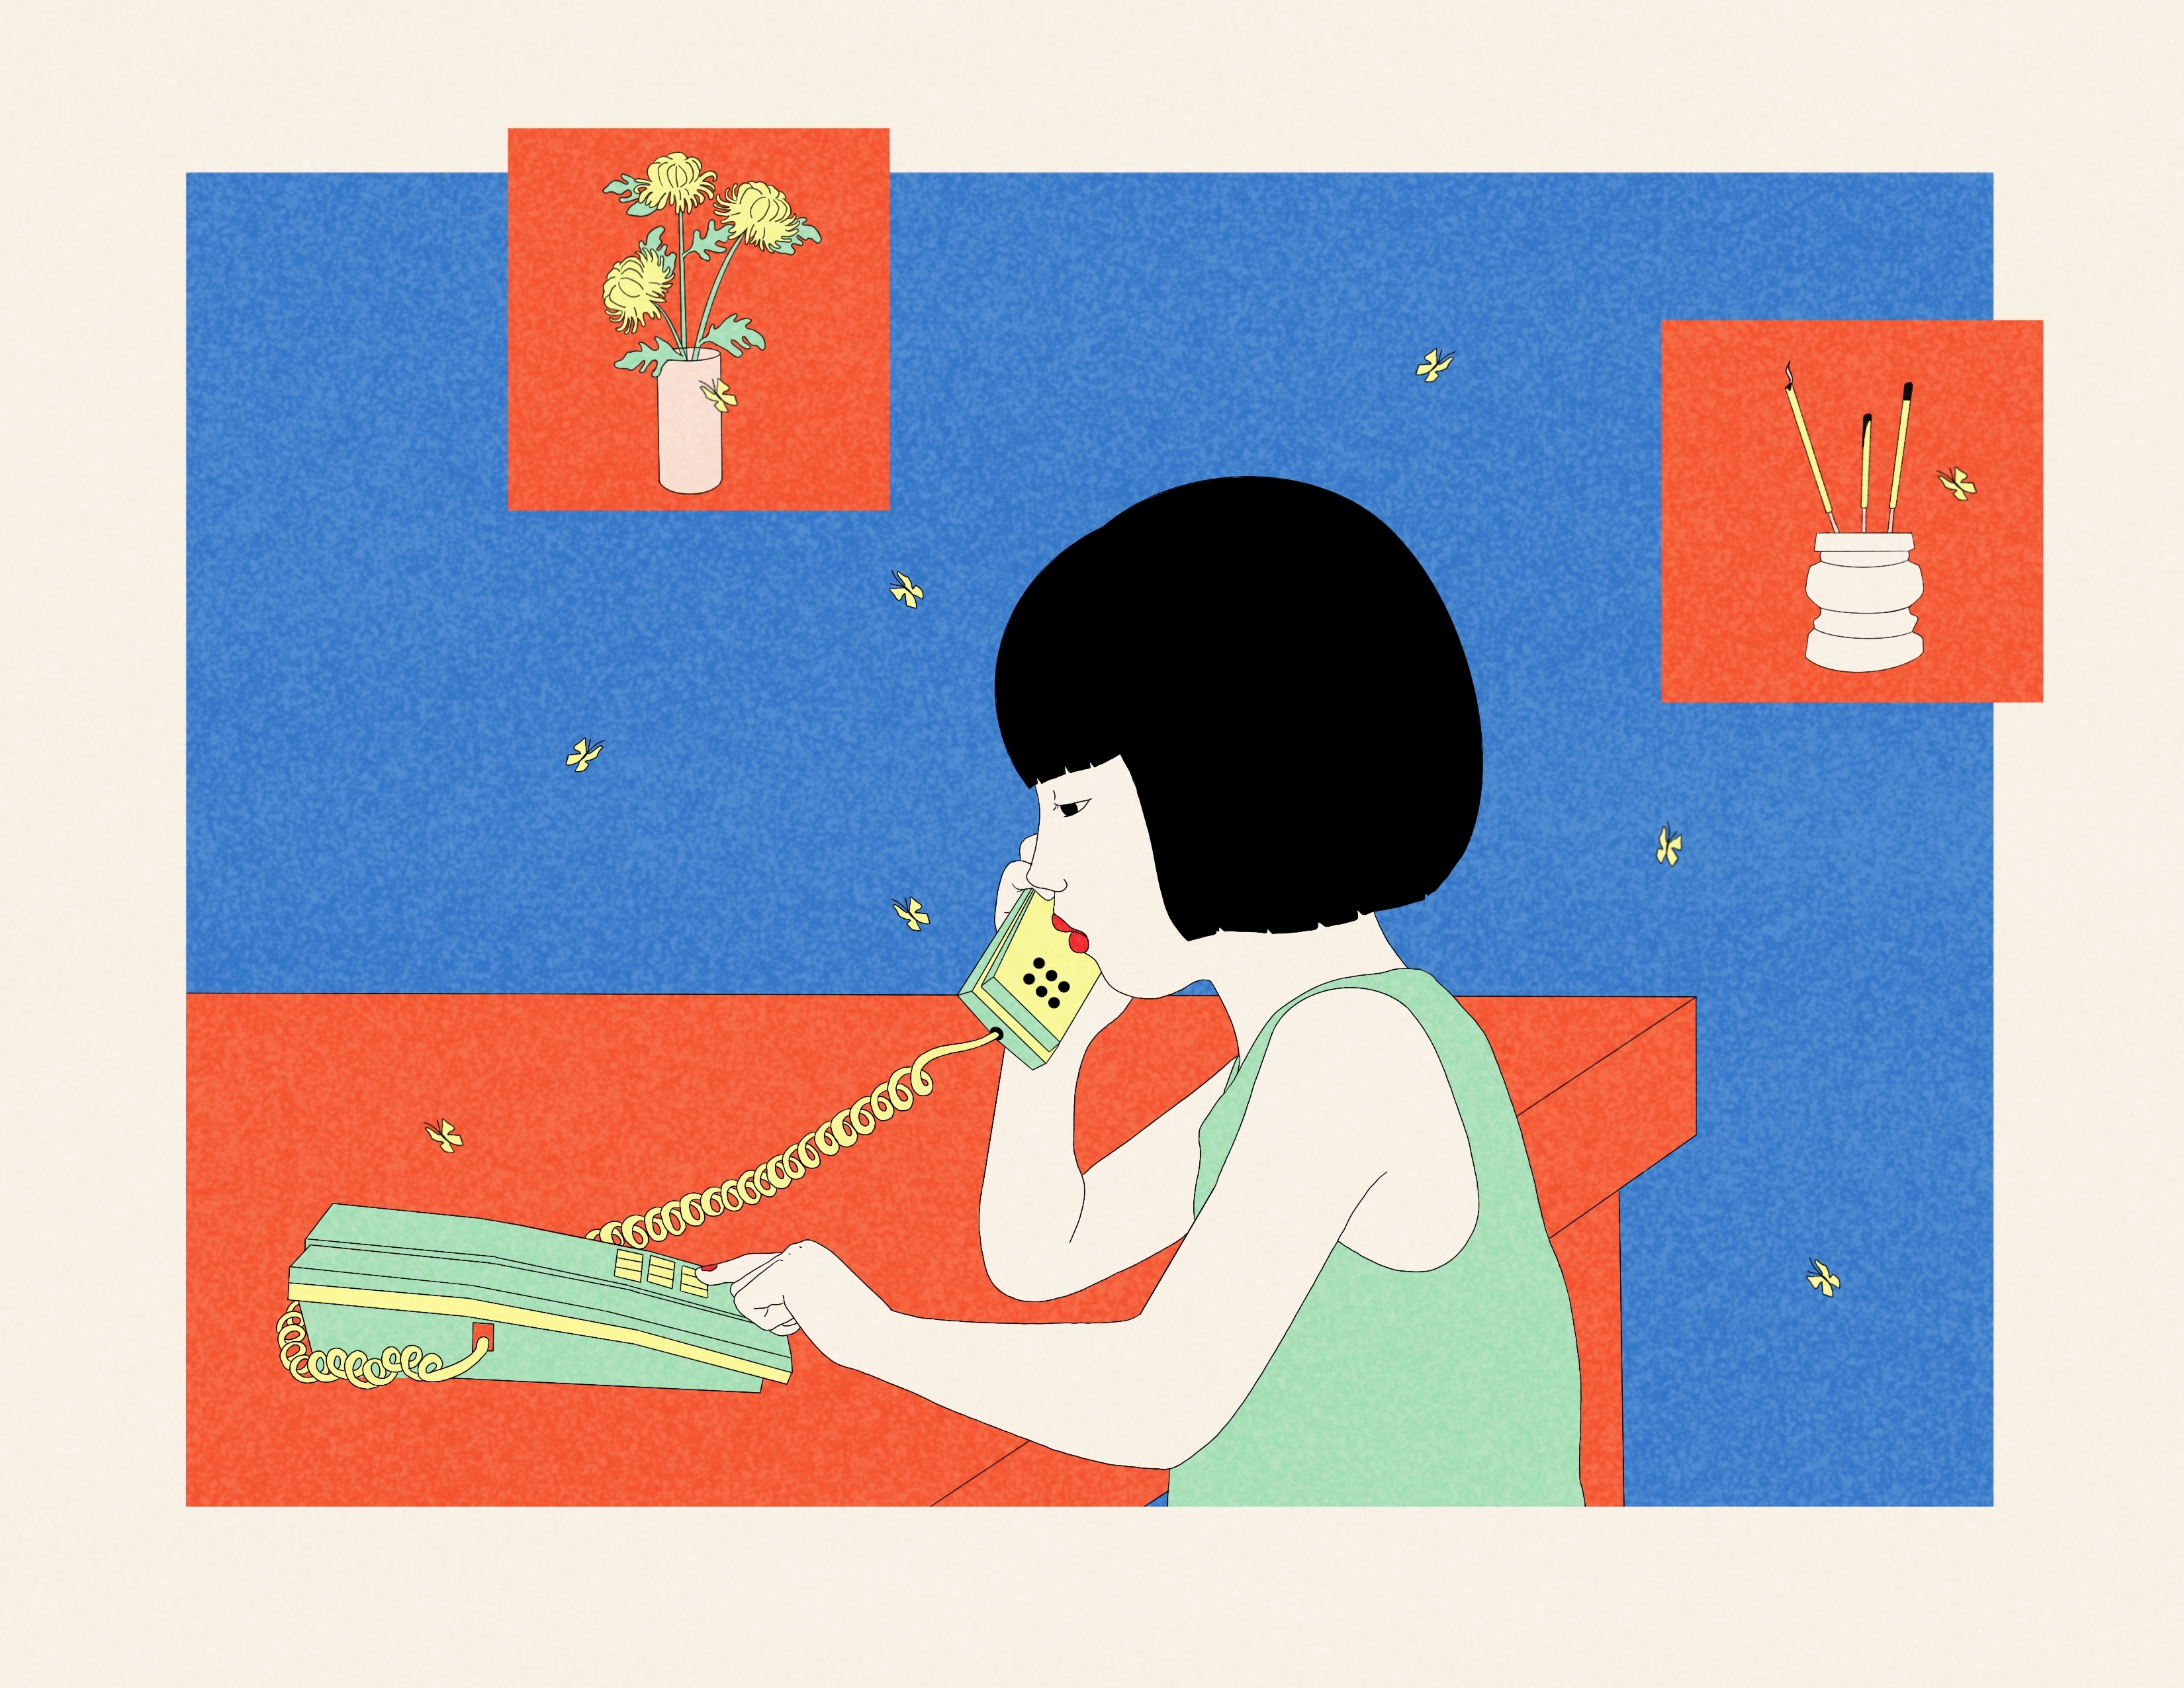 A little girl with short black hair in a green tank top sits at a red table, a green phone held up to her ear. The print is bordered in cream with a blue background. Two red squares float above: one with flowers in a vase, the other incense